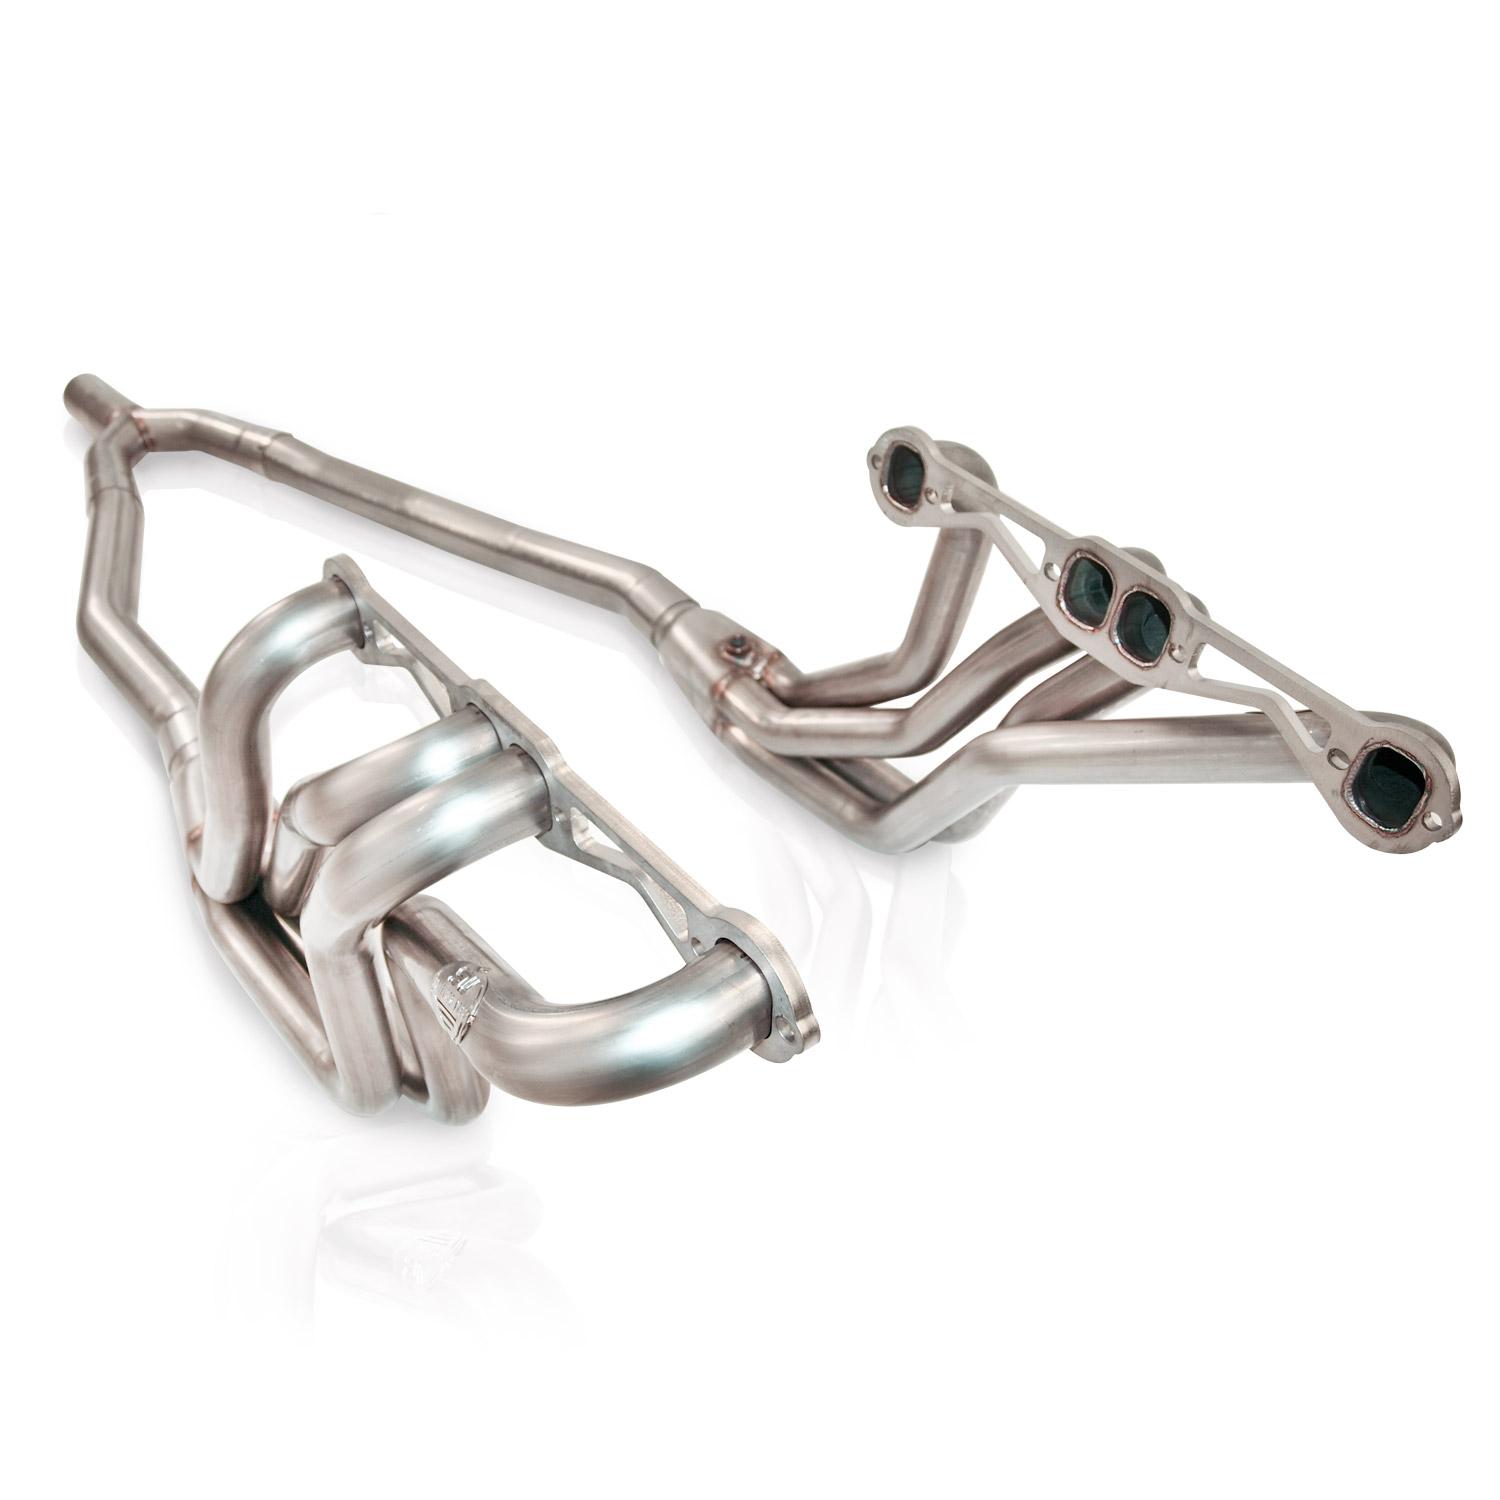 82-92 Fbody Stainless Works 1 3/4" Long Tube Headers w/Offroad Ypipe